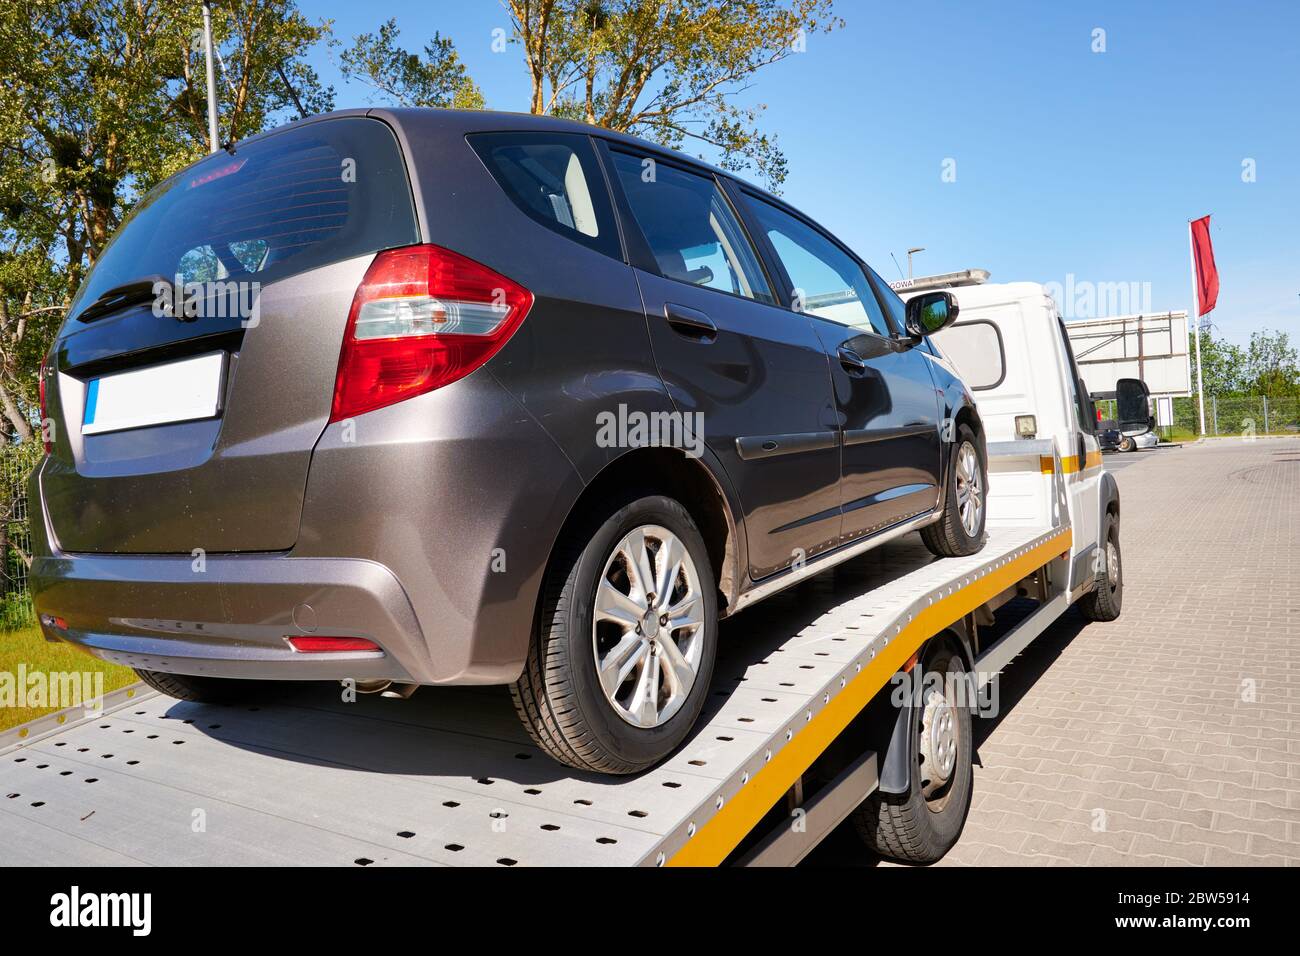 A car on tow truck for emergency car move. Stock Photo